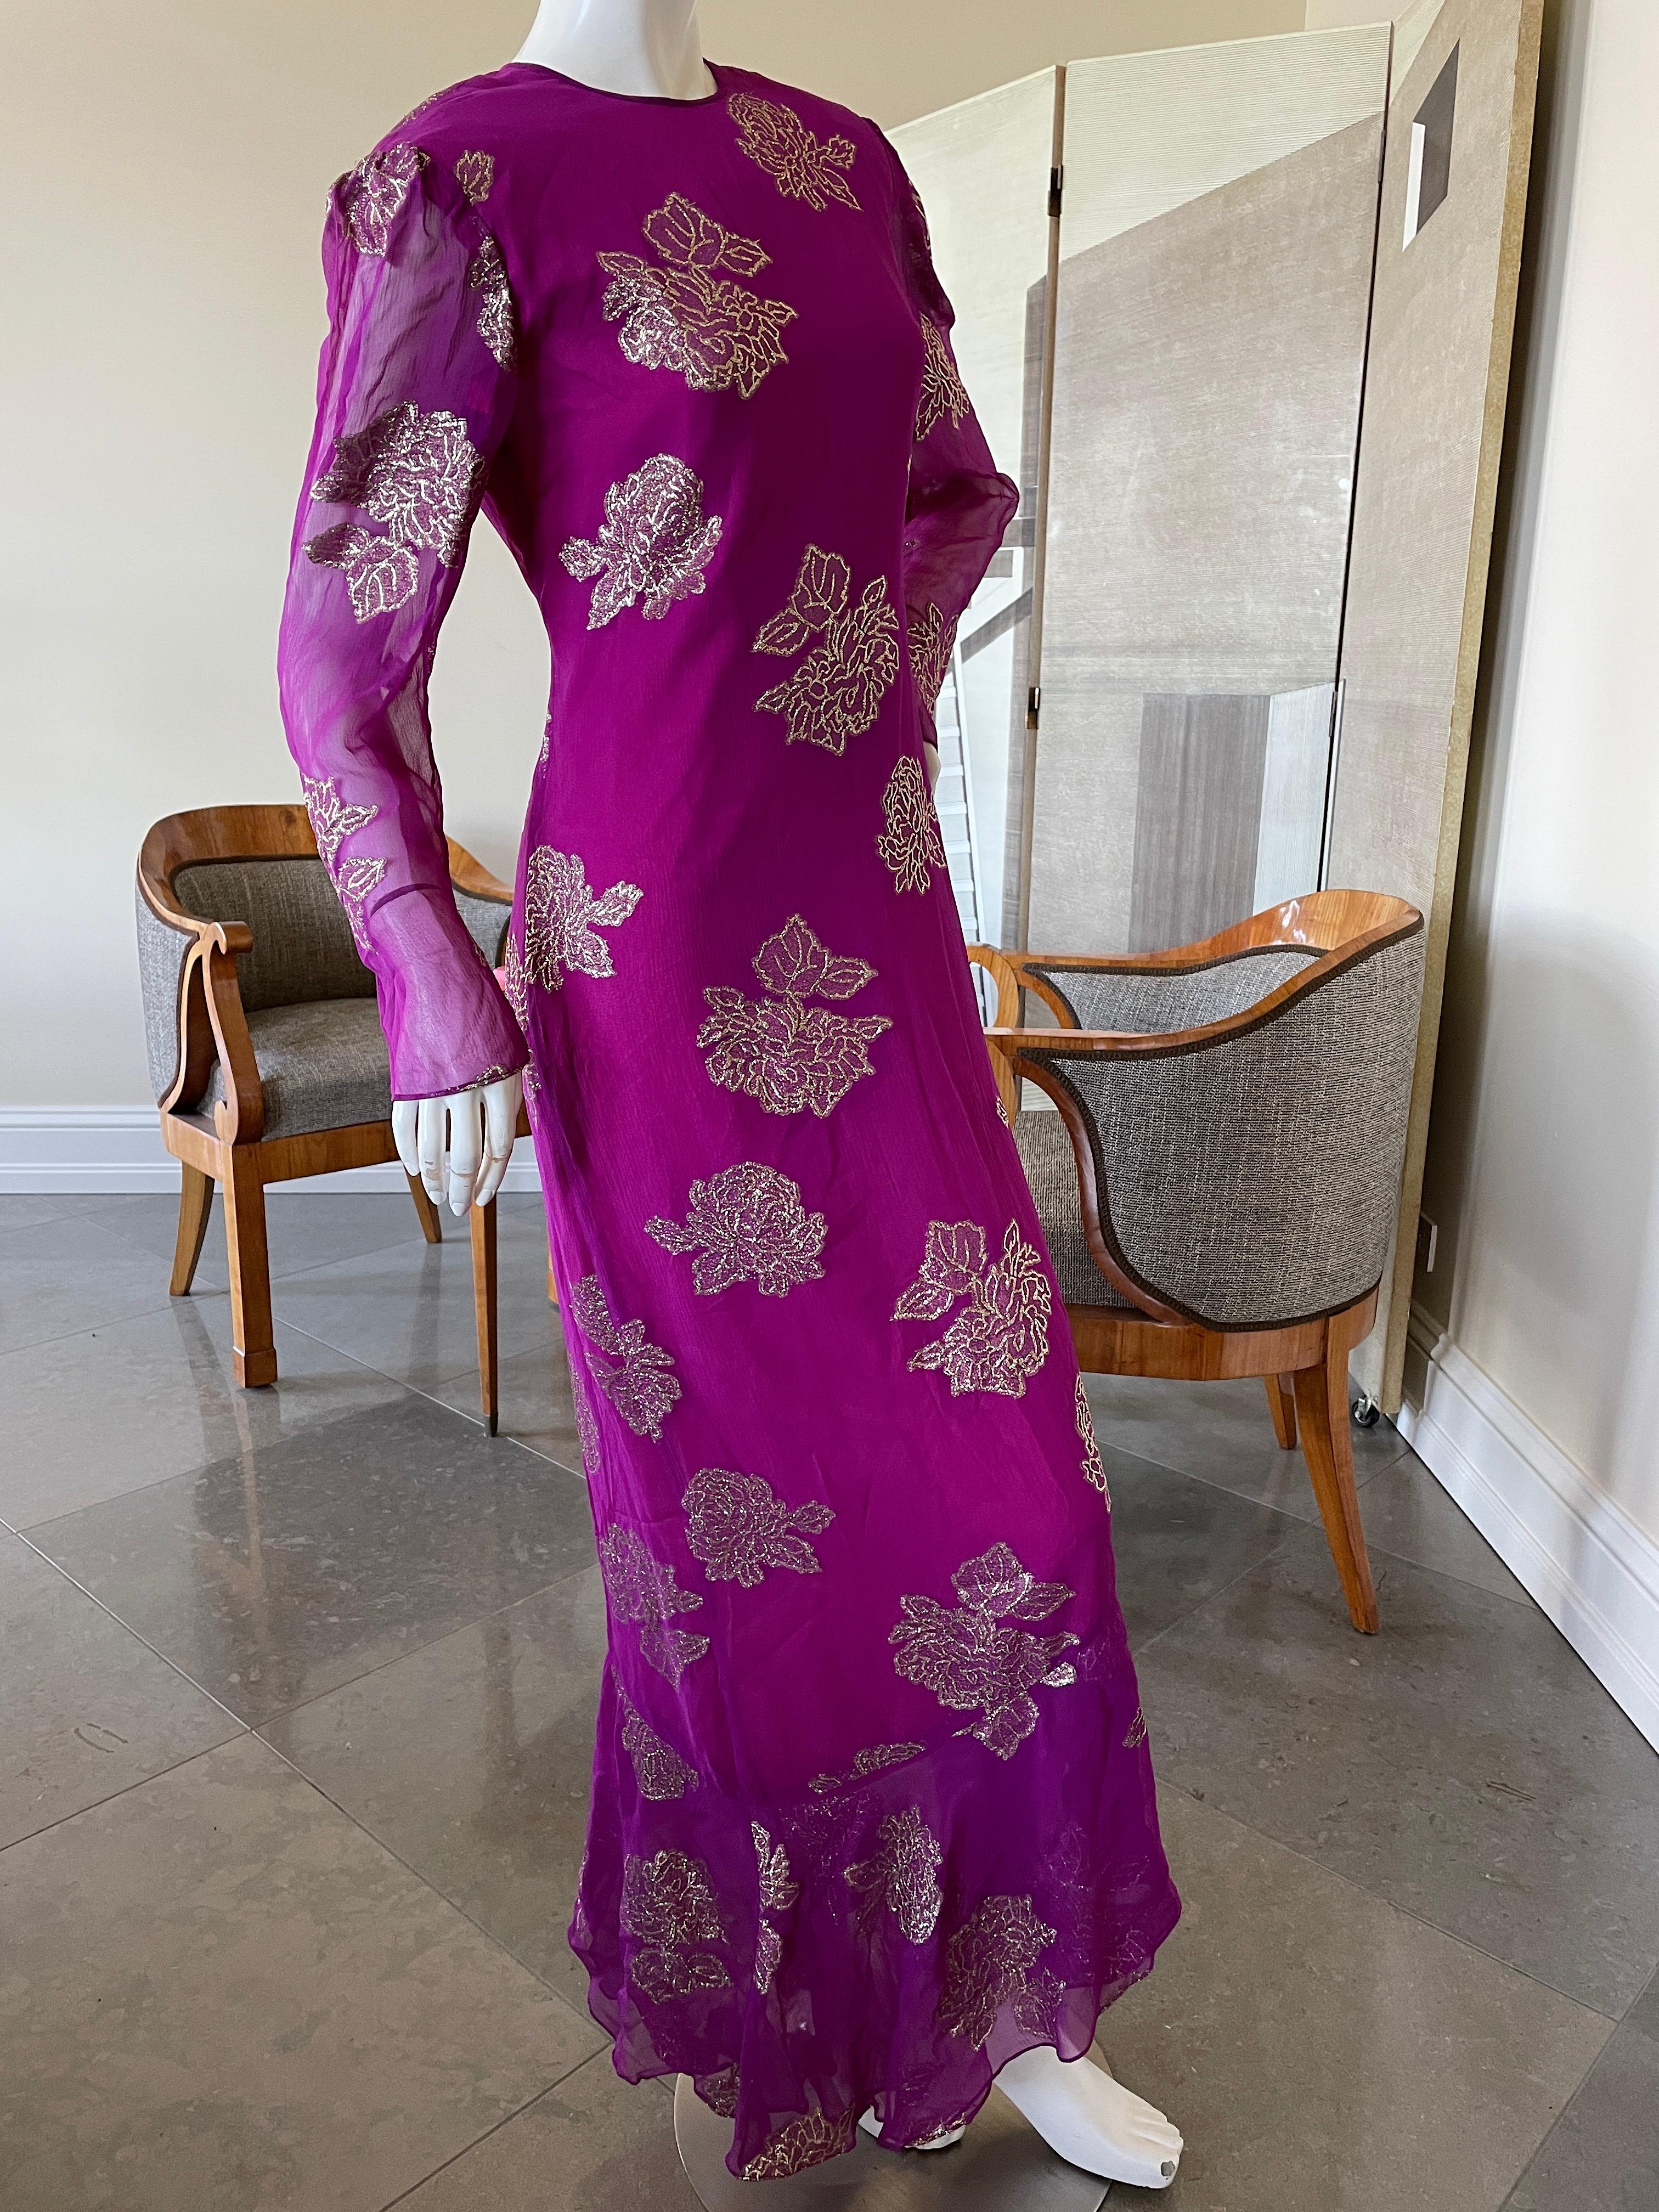 Hanae Mori Deep Pink Silk Chiffon Gold Chrysanthemum Pattern Dress.
Hanae Mori opened her house in 1951 and is the first Asian woman to be admitted as an official haute couture design house by the The Chambre Syndicale de la Haute Couture in Paris